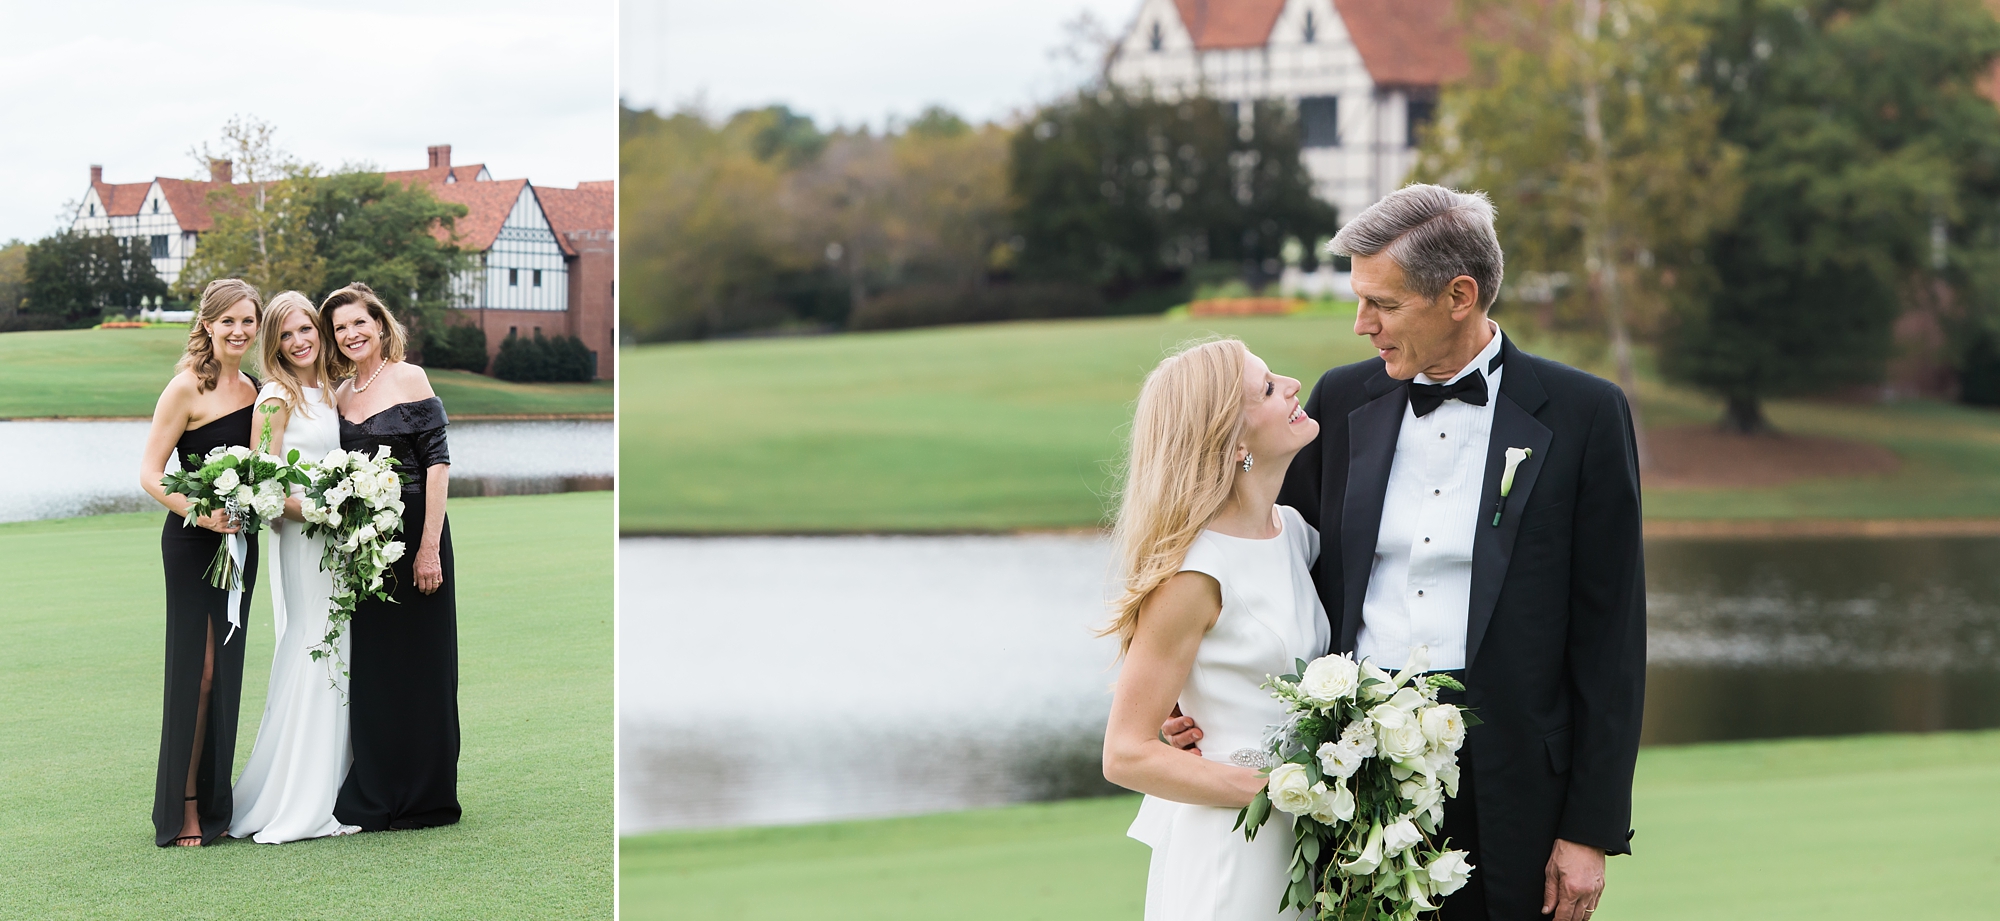 Black tie wedding at East Lake Golf Club Top Wedding Photographers Leigh and Becca